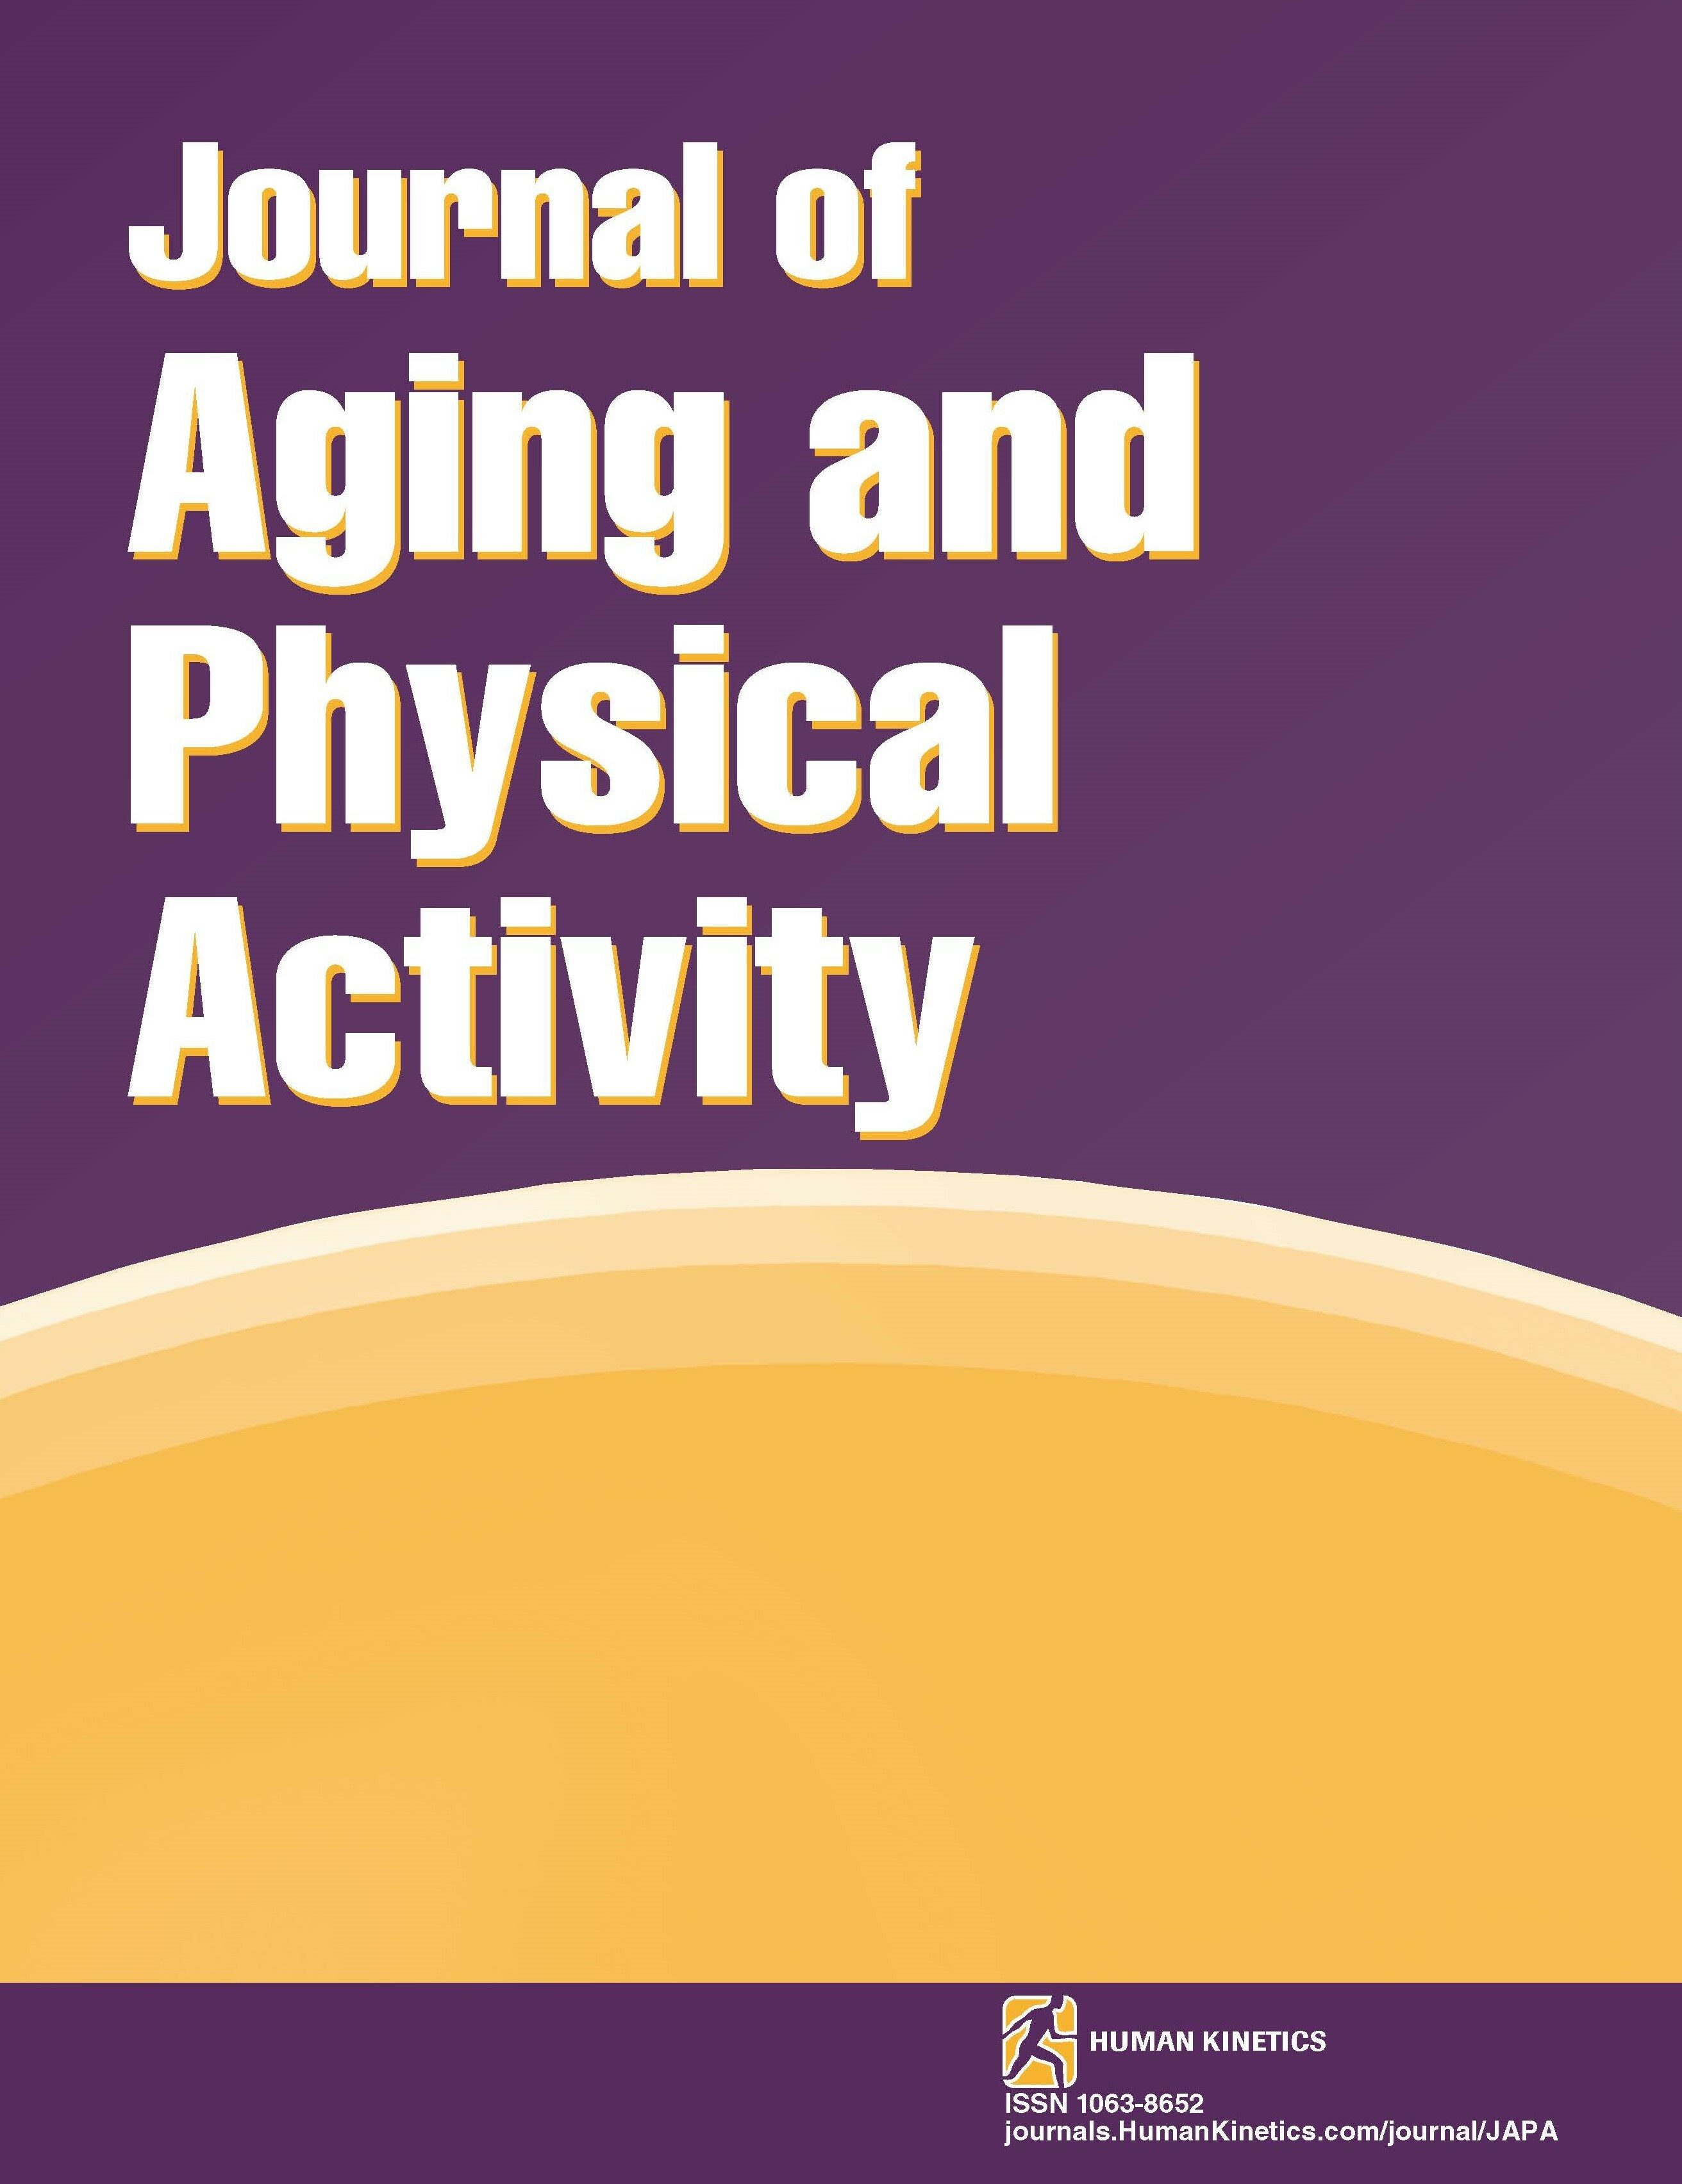 Exploring Determinants of Exercise-Related Affective Valence in Regular Exercisers Between the Ages of 55 and 69 Years